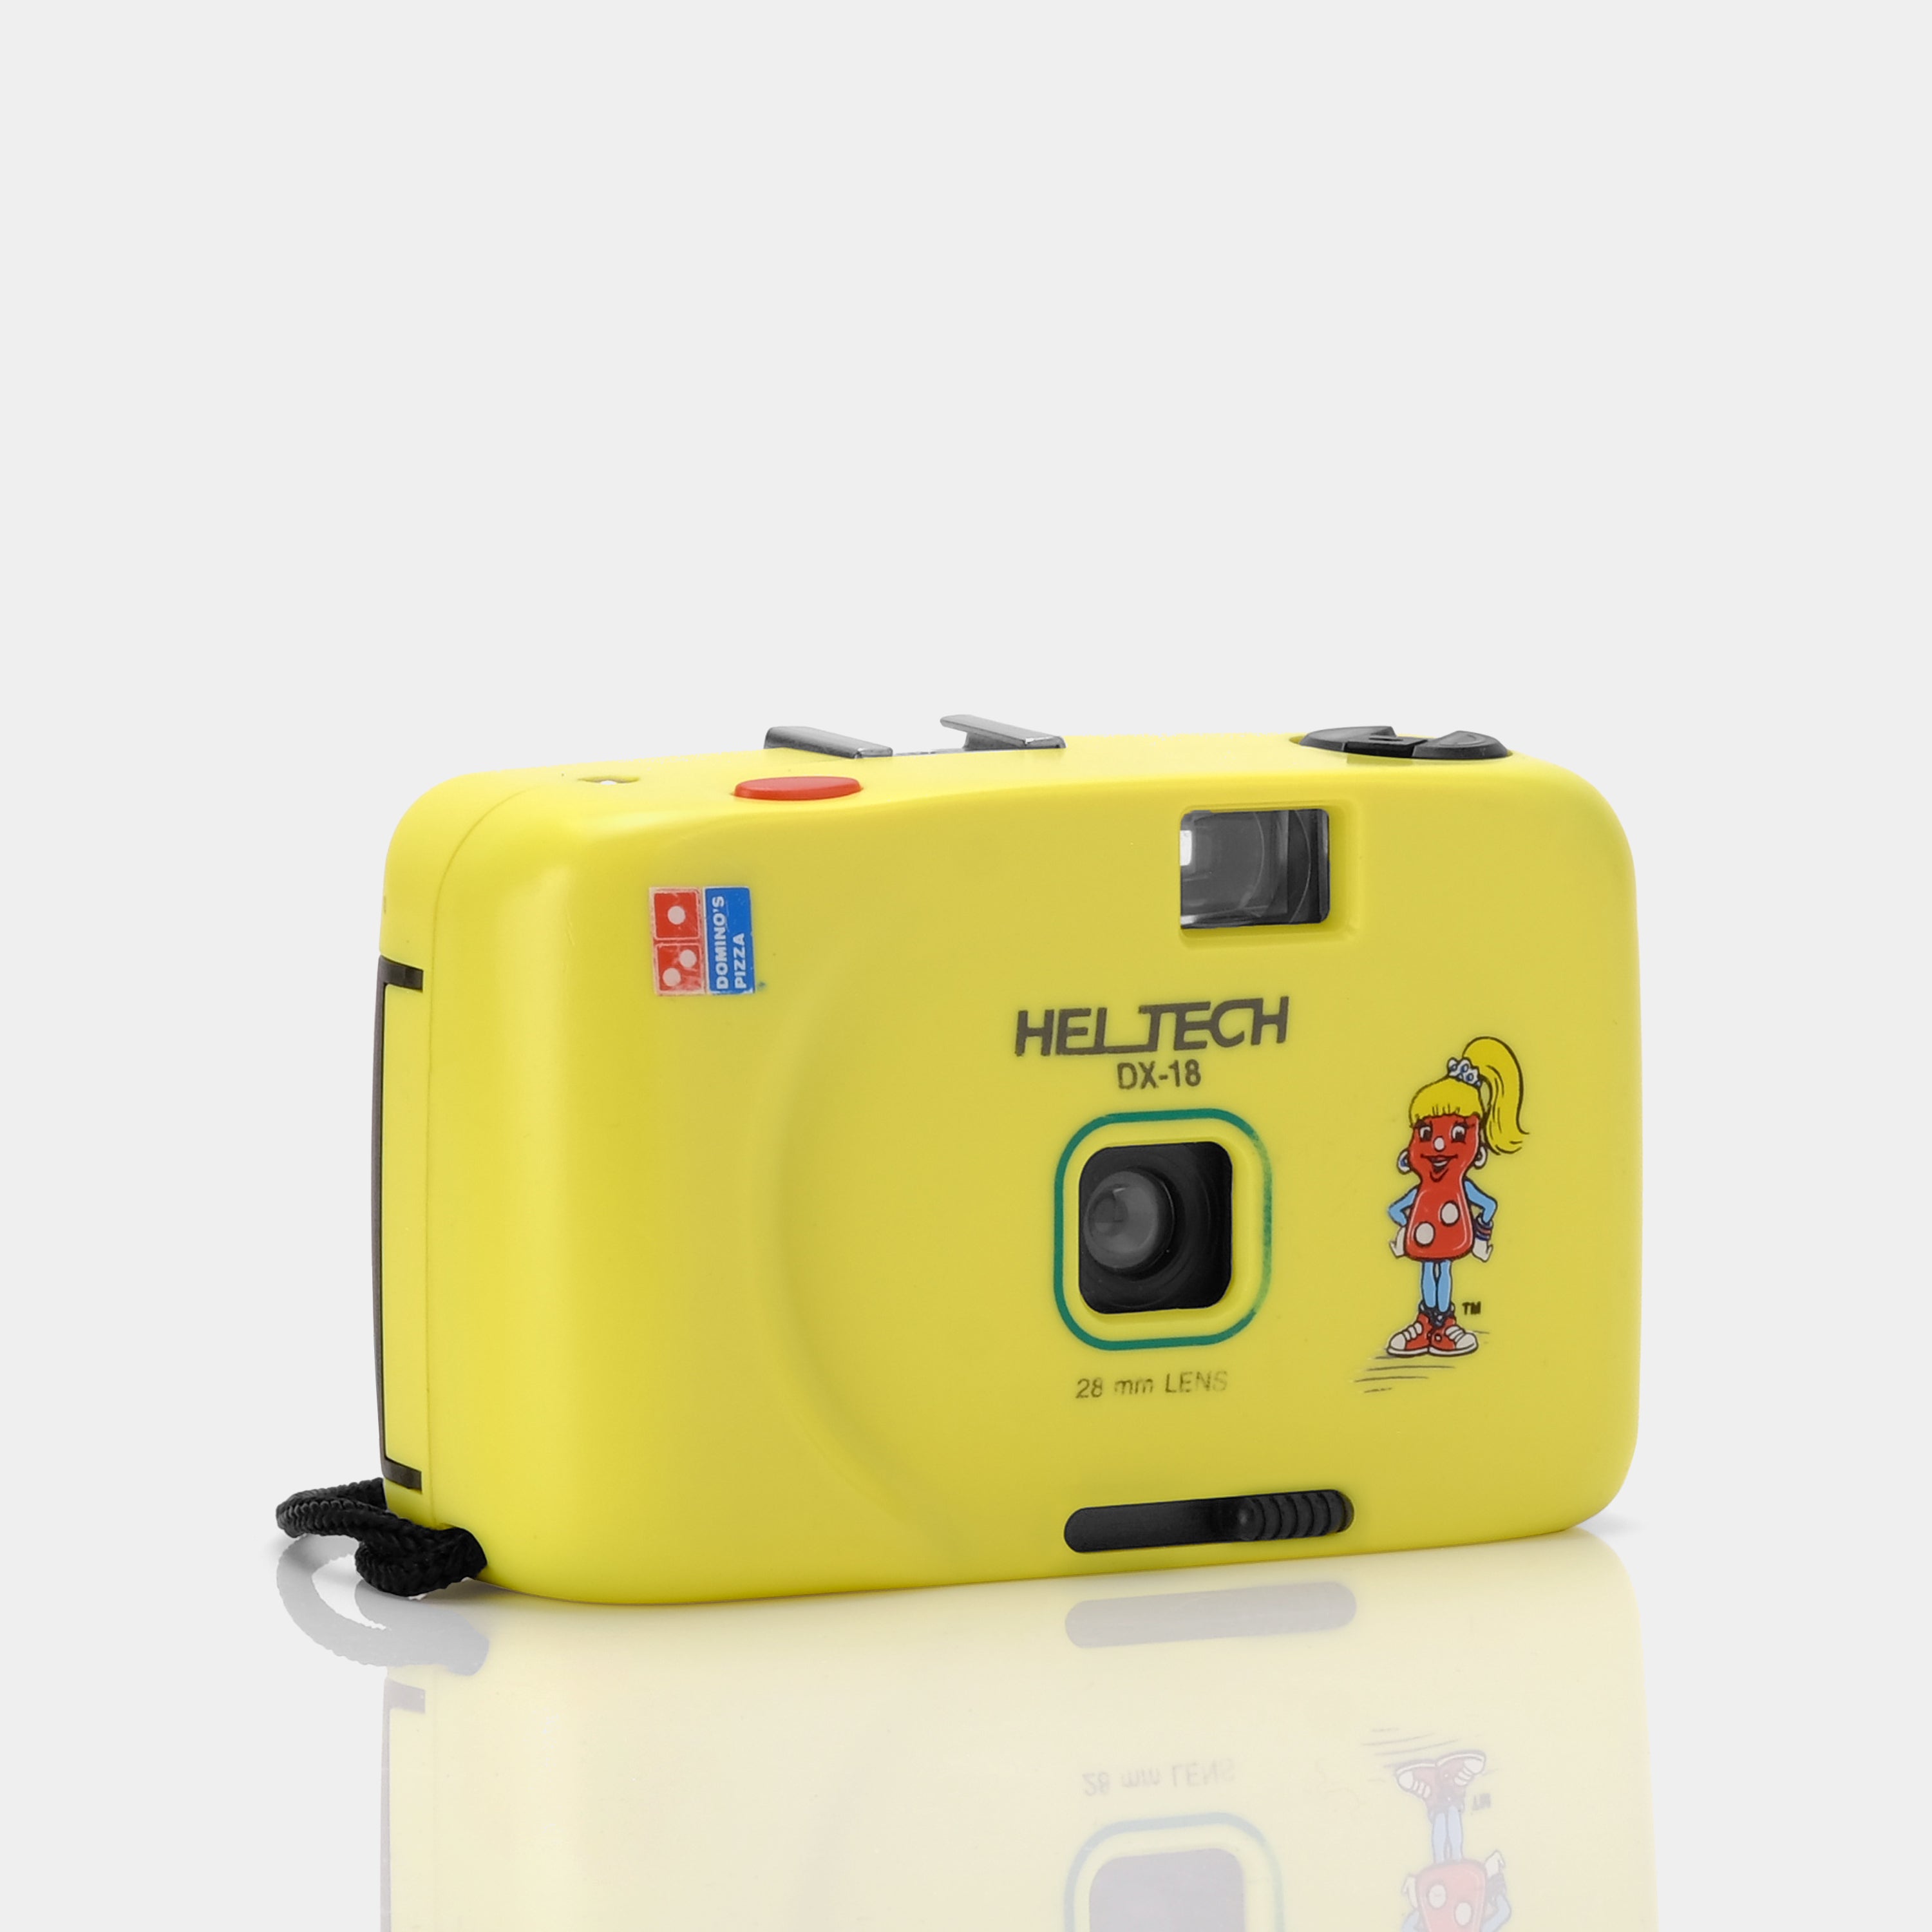 Heltech DX-18 Domino's Pizza 35mm Point And Shoot Film Camera